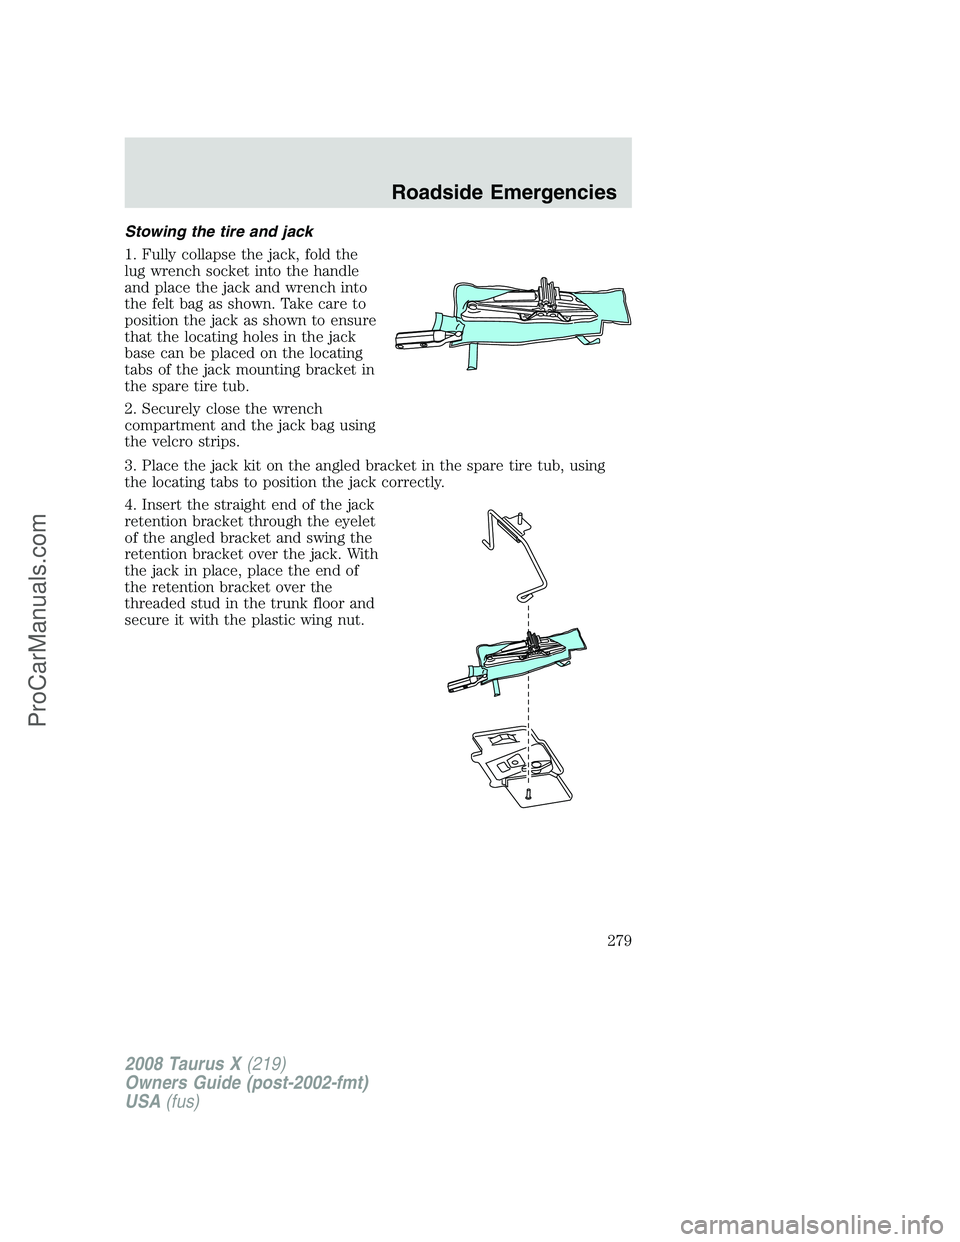 FORD FREESTYLE 2008  Owners Manual Stowing the tire and jack
1. Fully collapse the jack, fold the
lug wrench socket into the handle
and place the jack and wrench into
the felt bag as shown. Take care to
position the jack as shown to en